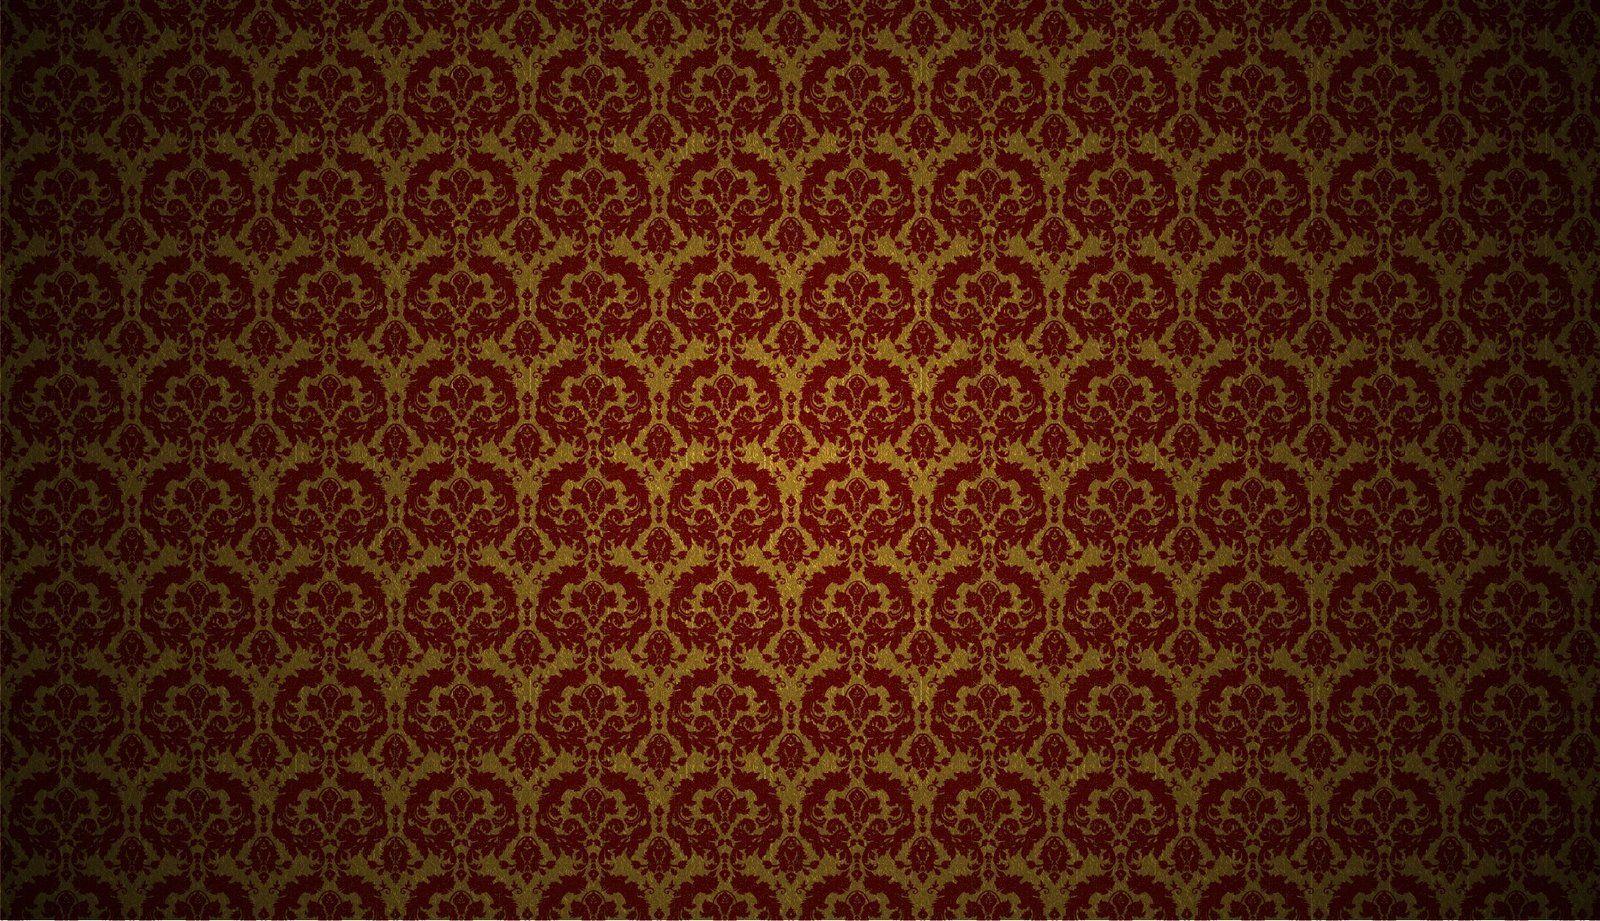 Red And Gold Wallpaper. Cool HD Wallpaper